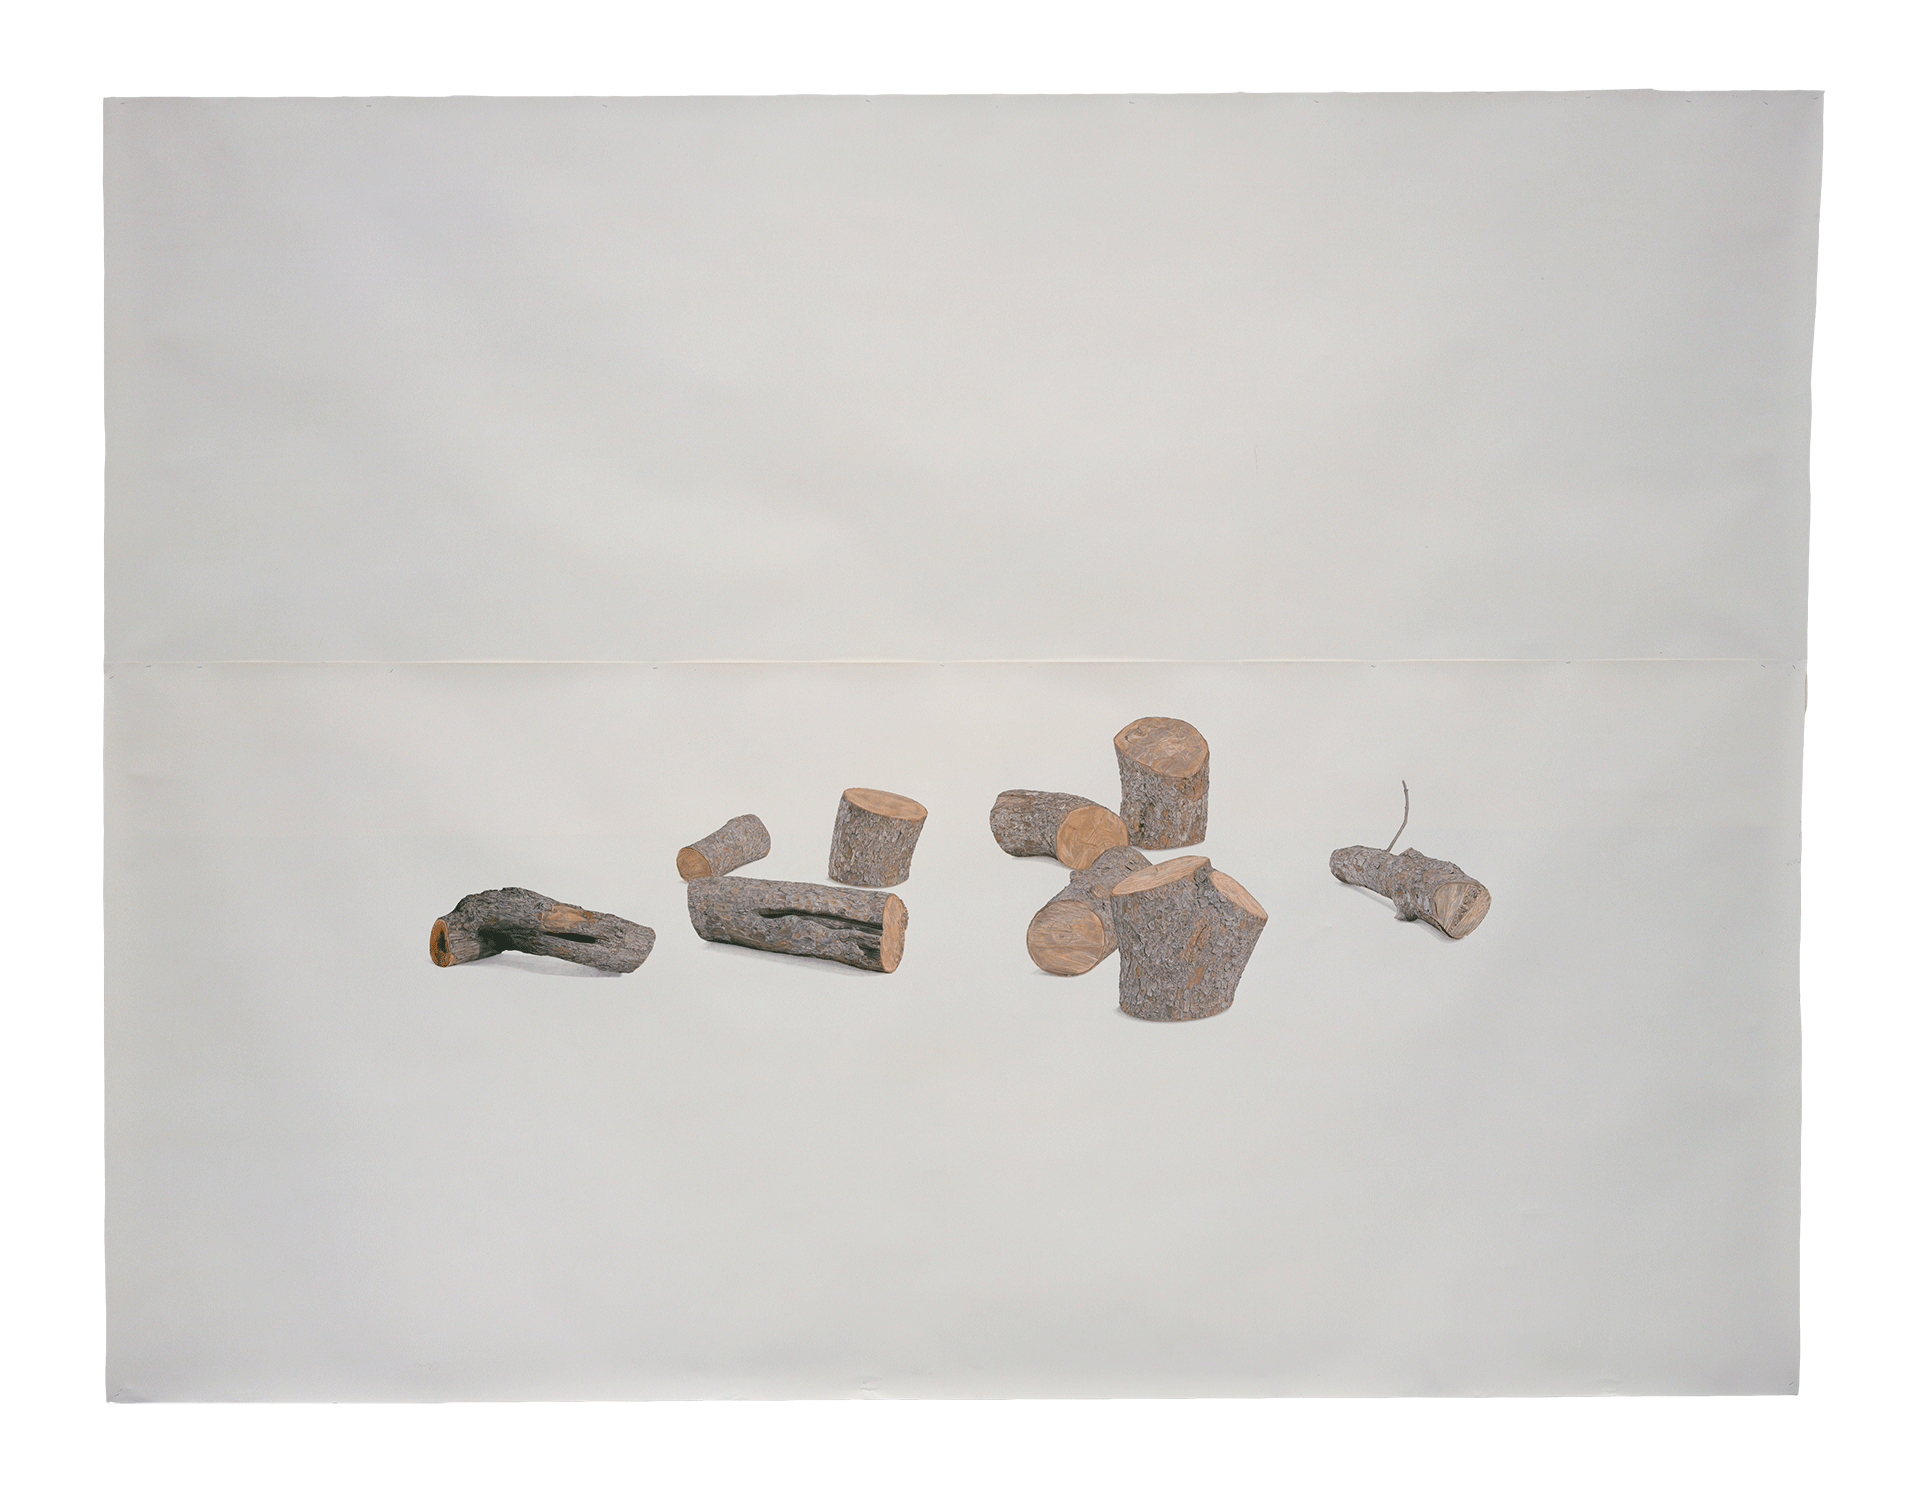 An oil, wax, and collage work on paper by Toba Khedoori, titled Untitled (Logs), dated 2006.